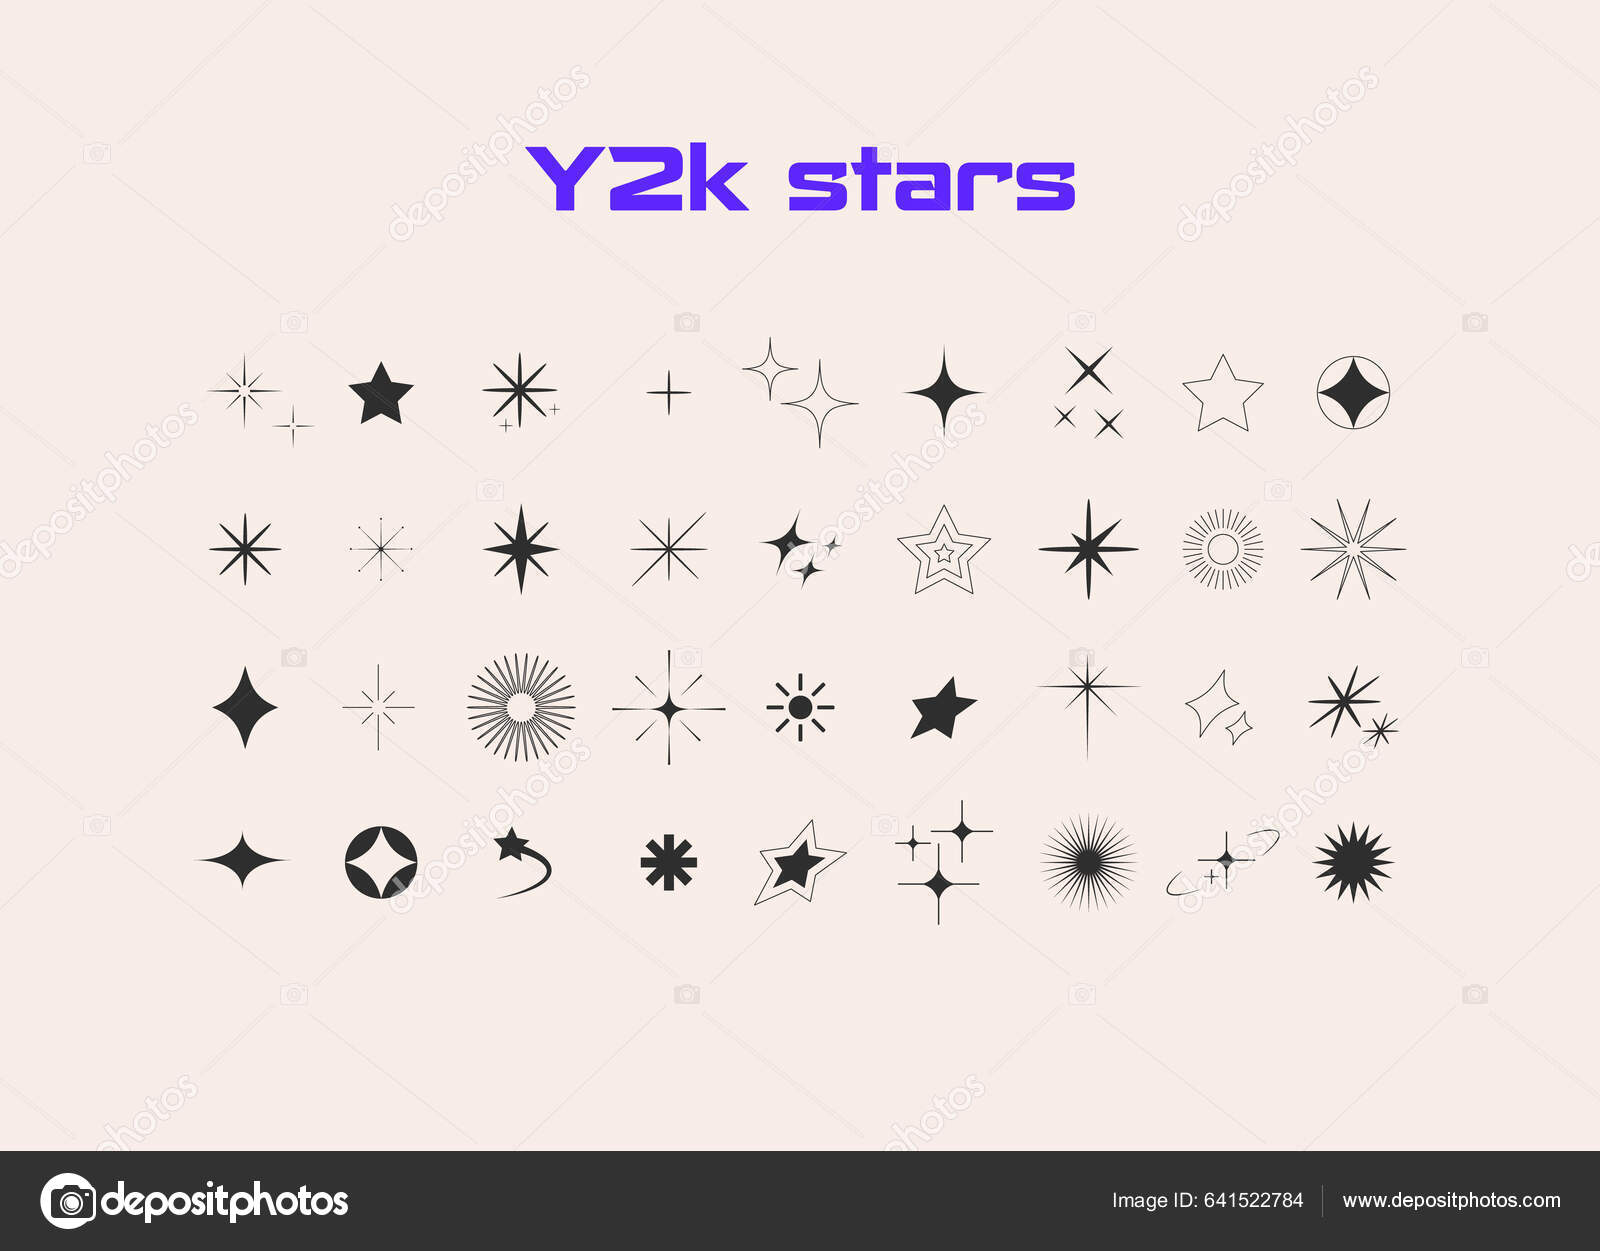 Trendy retro group of icons, symbols and shapes in Y2K aesthetic